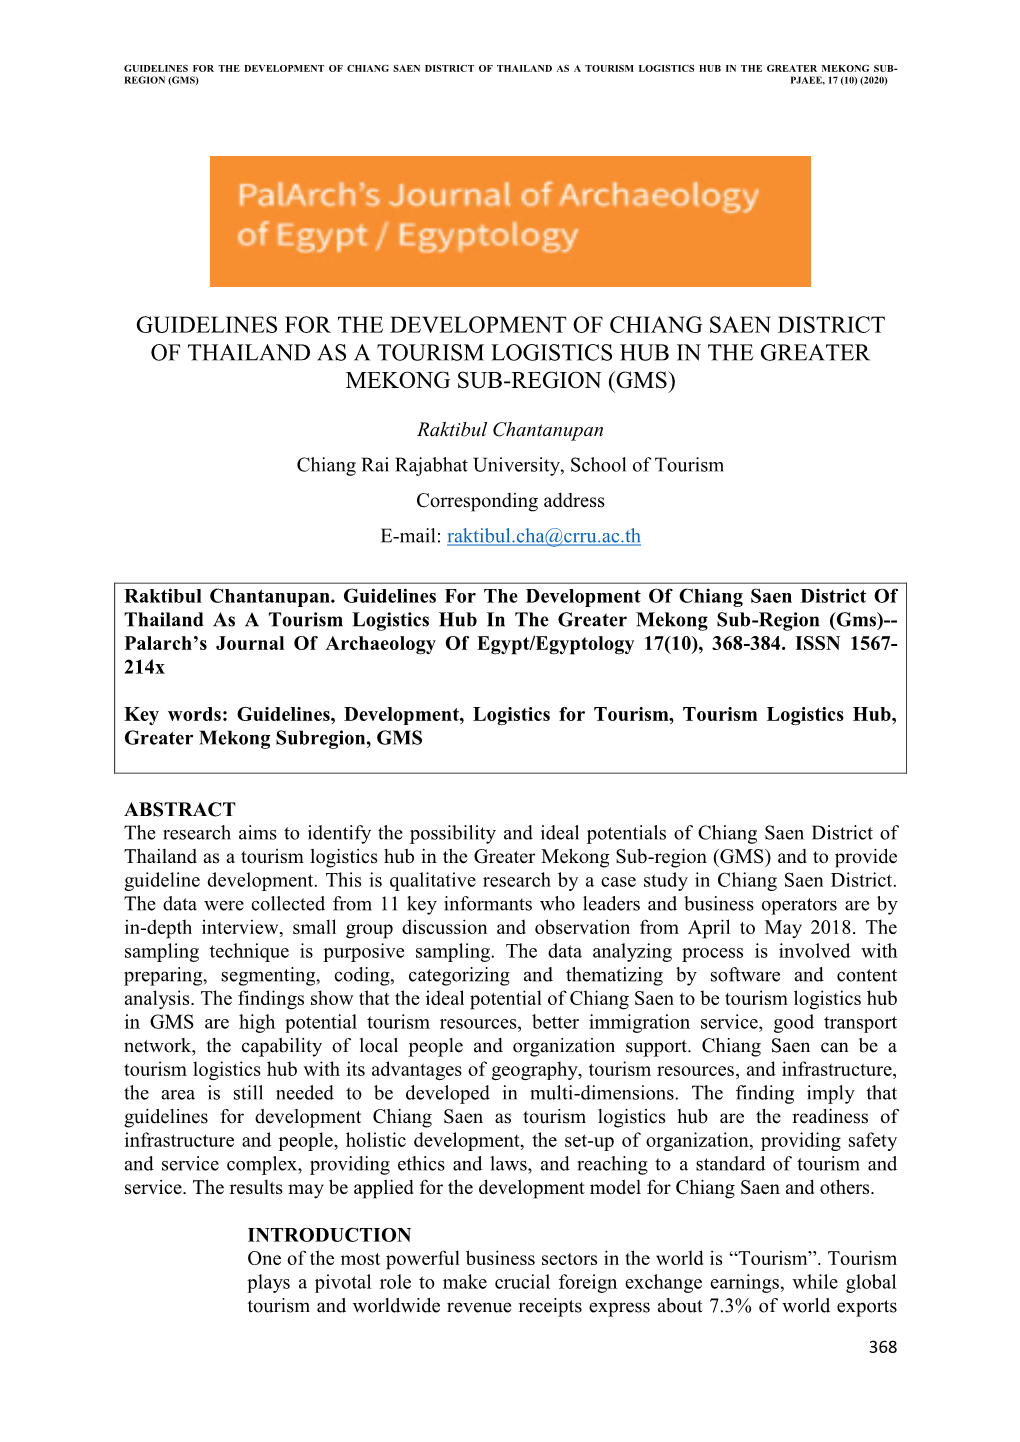 Guidelines for the Development of Chiang Saen District of Thailand As a Tourism Logistics Hub in the Greater Mekong Sub- Region (Gms) Pjaee, 17 (10) (2020)